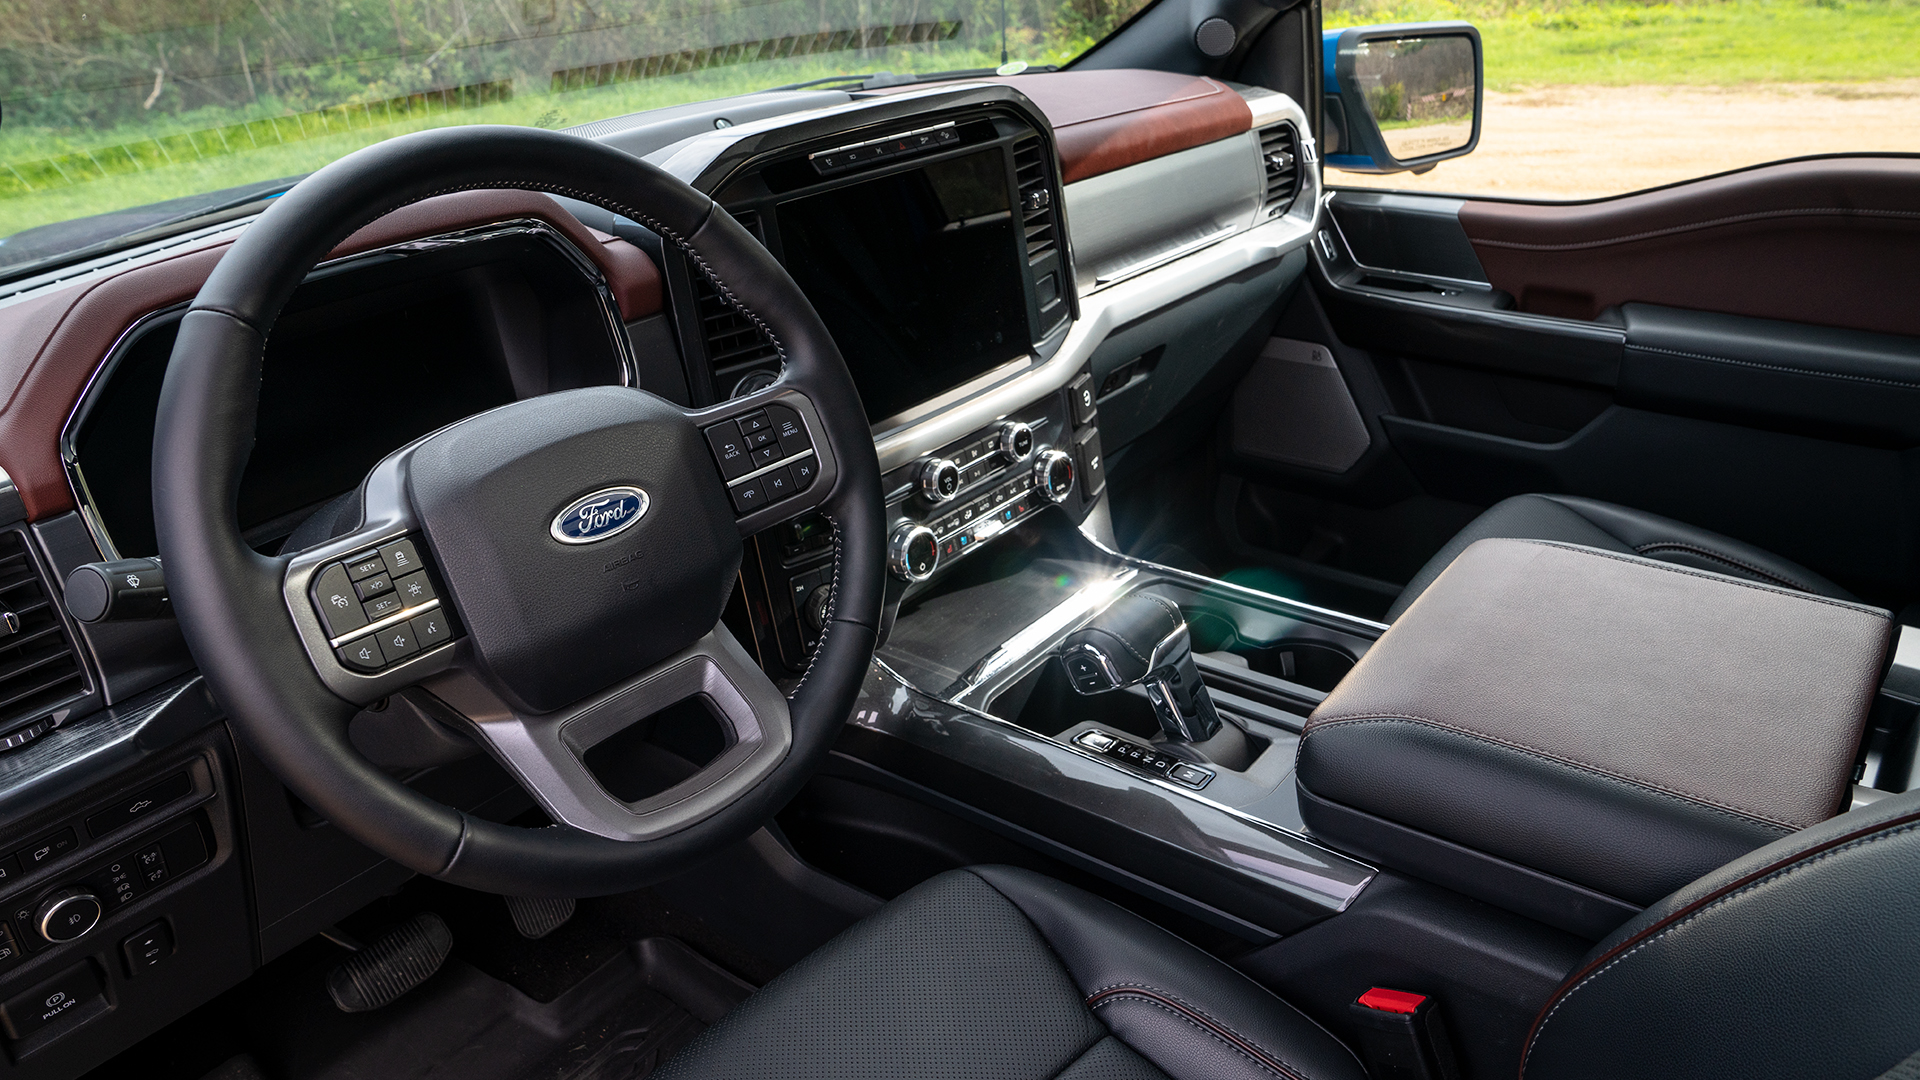 Ford kept the interior of the Lariat fairly simple.